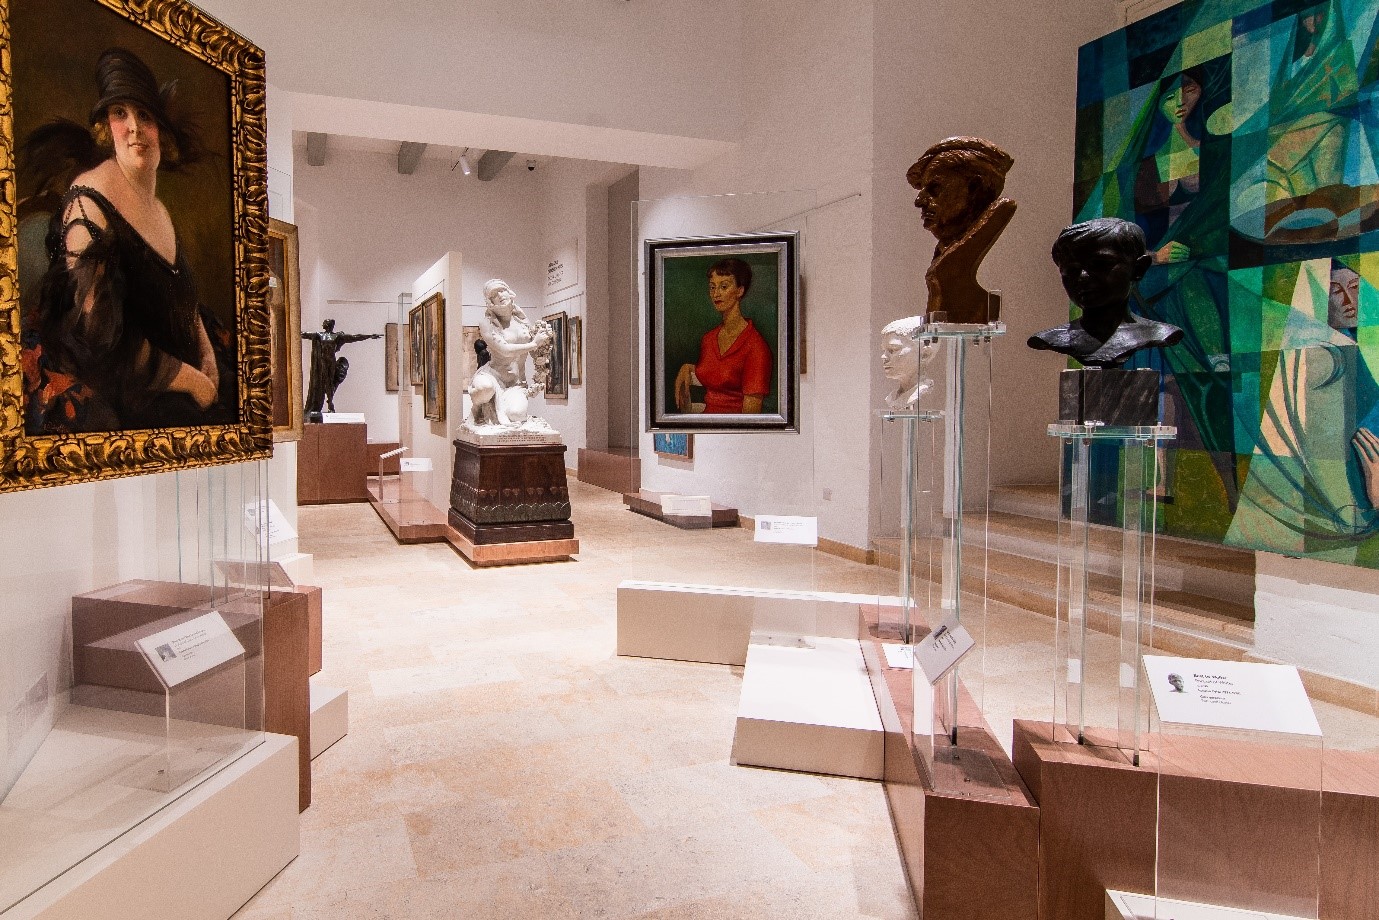 Collection of works in the Malta National Community Art Museum (MUŻA). Phot. Alex Turnball